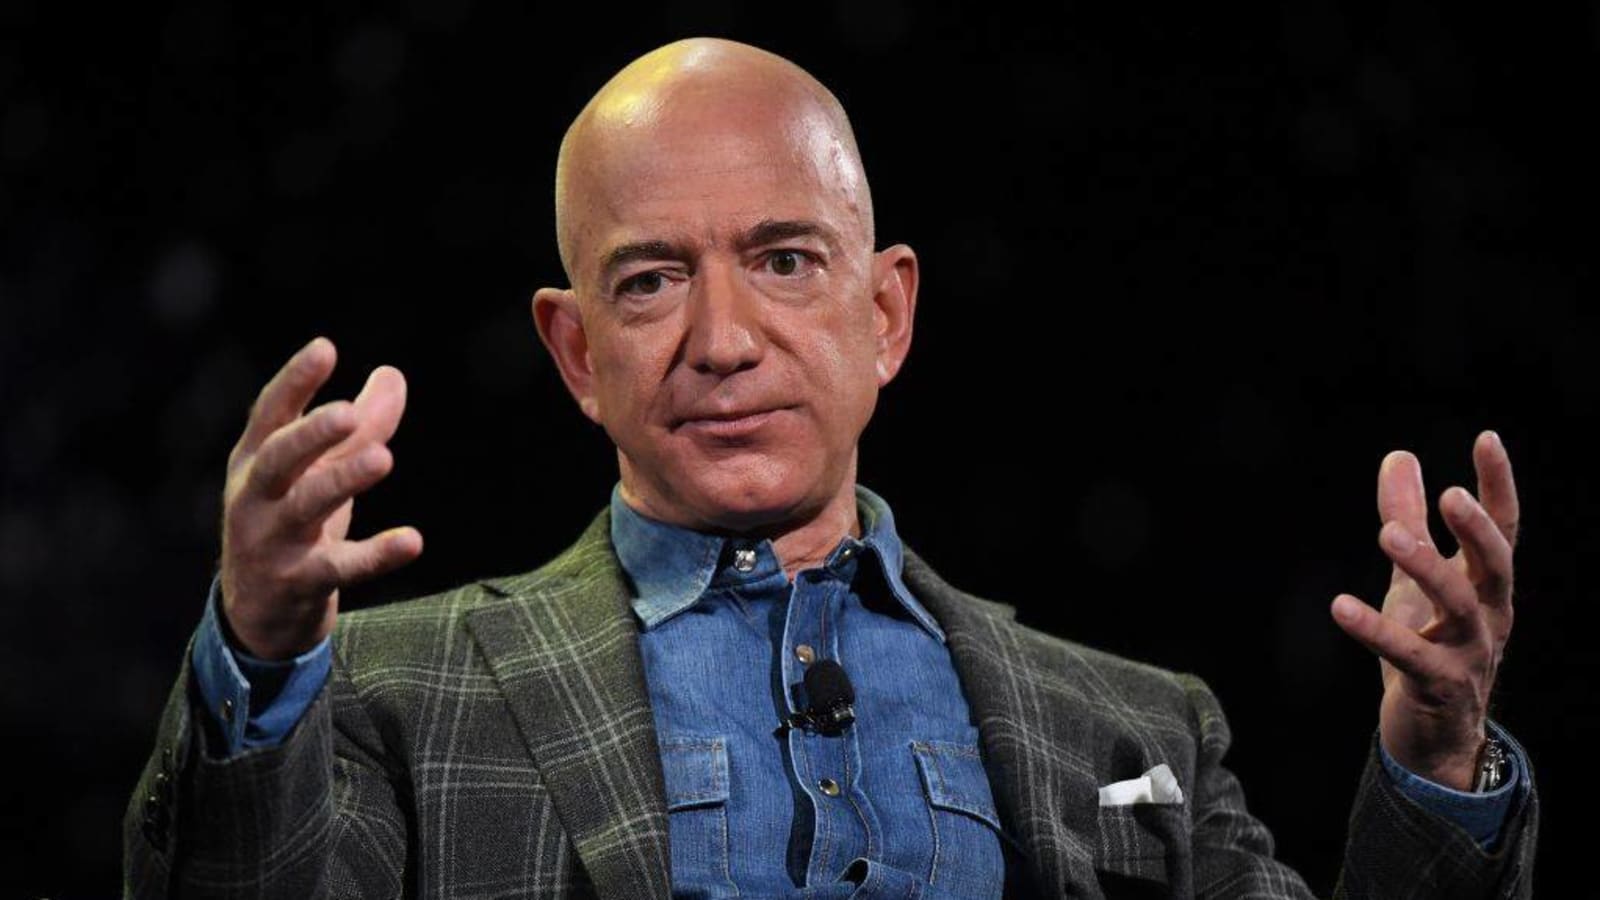 Why billionaire Jeff Bezos was at the Hall of Fame enshrinement ceremony